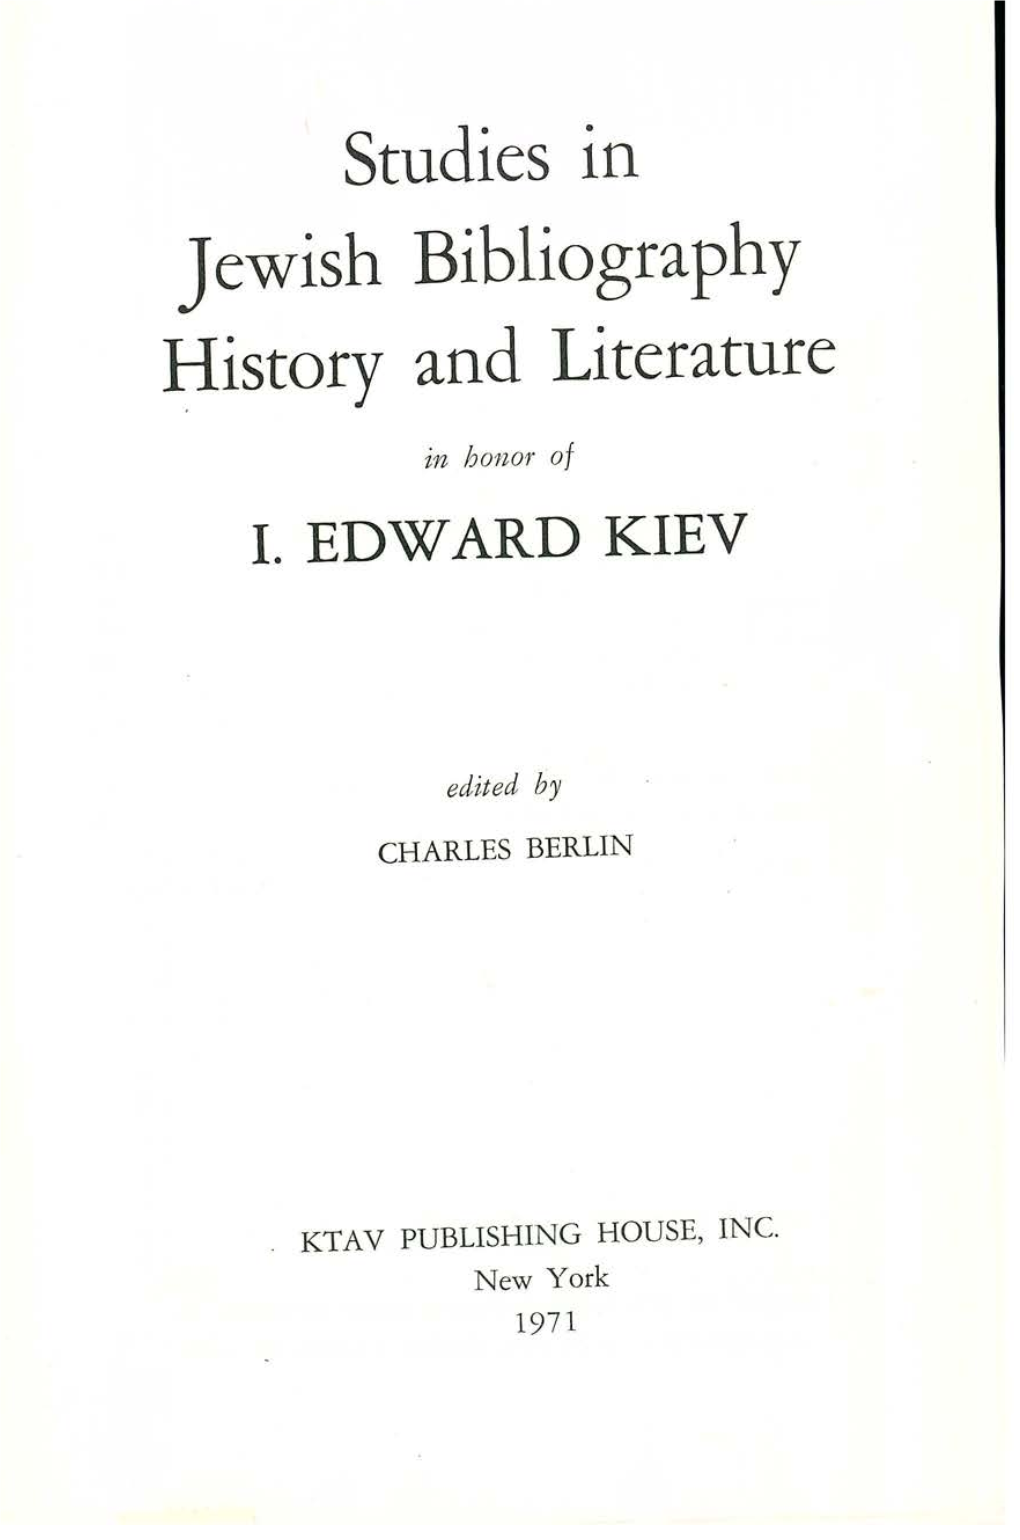 Studies in Jewish Bibliography History and Literature